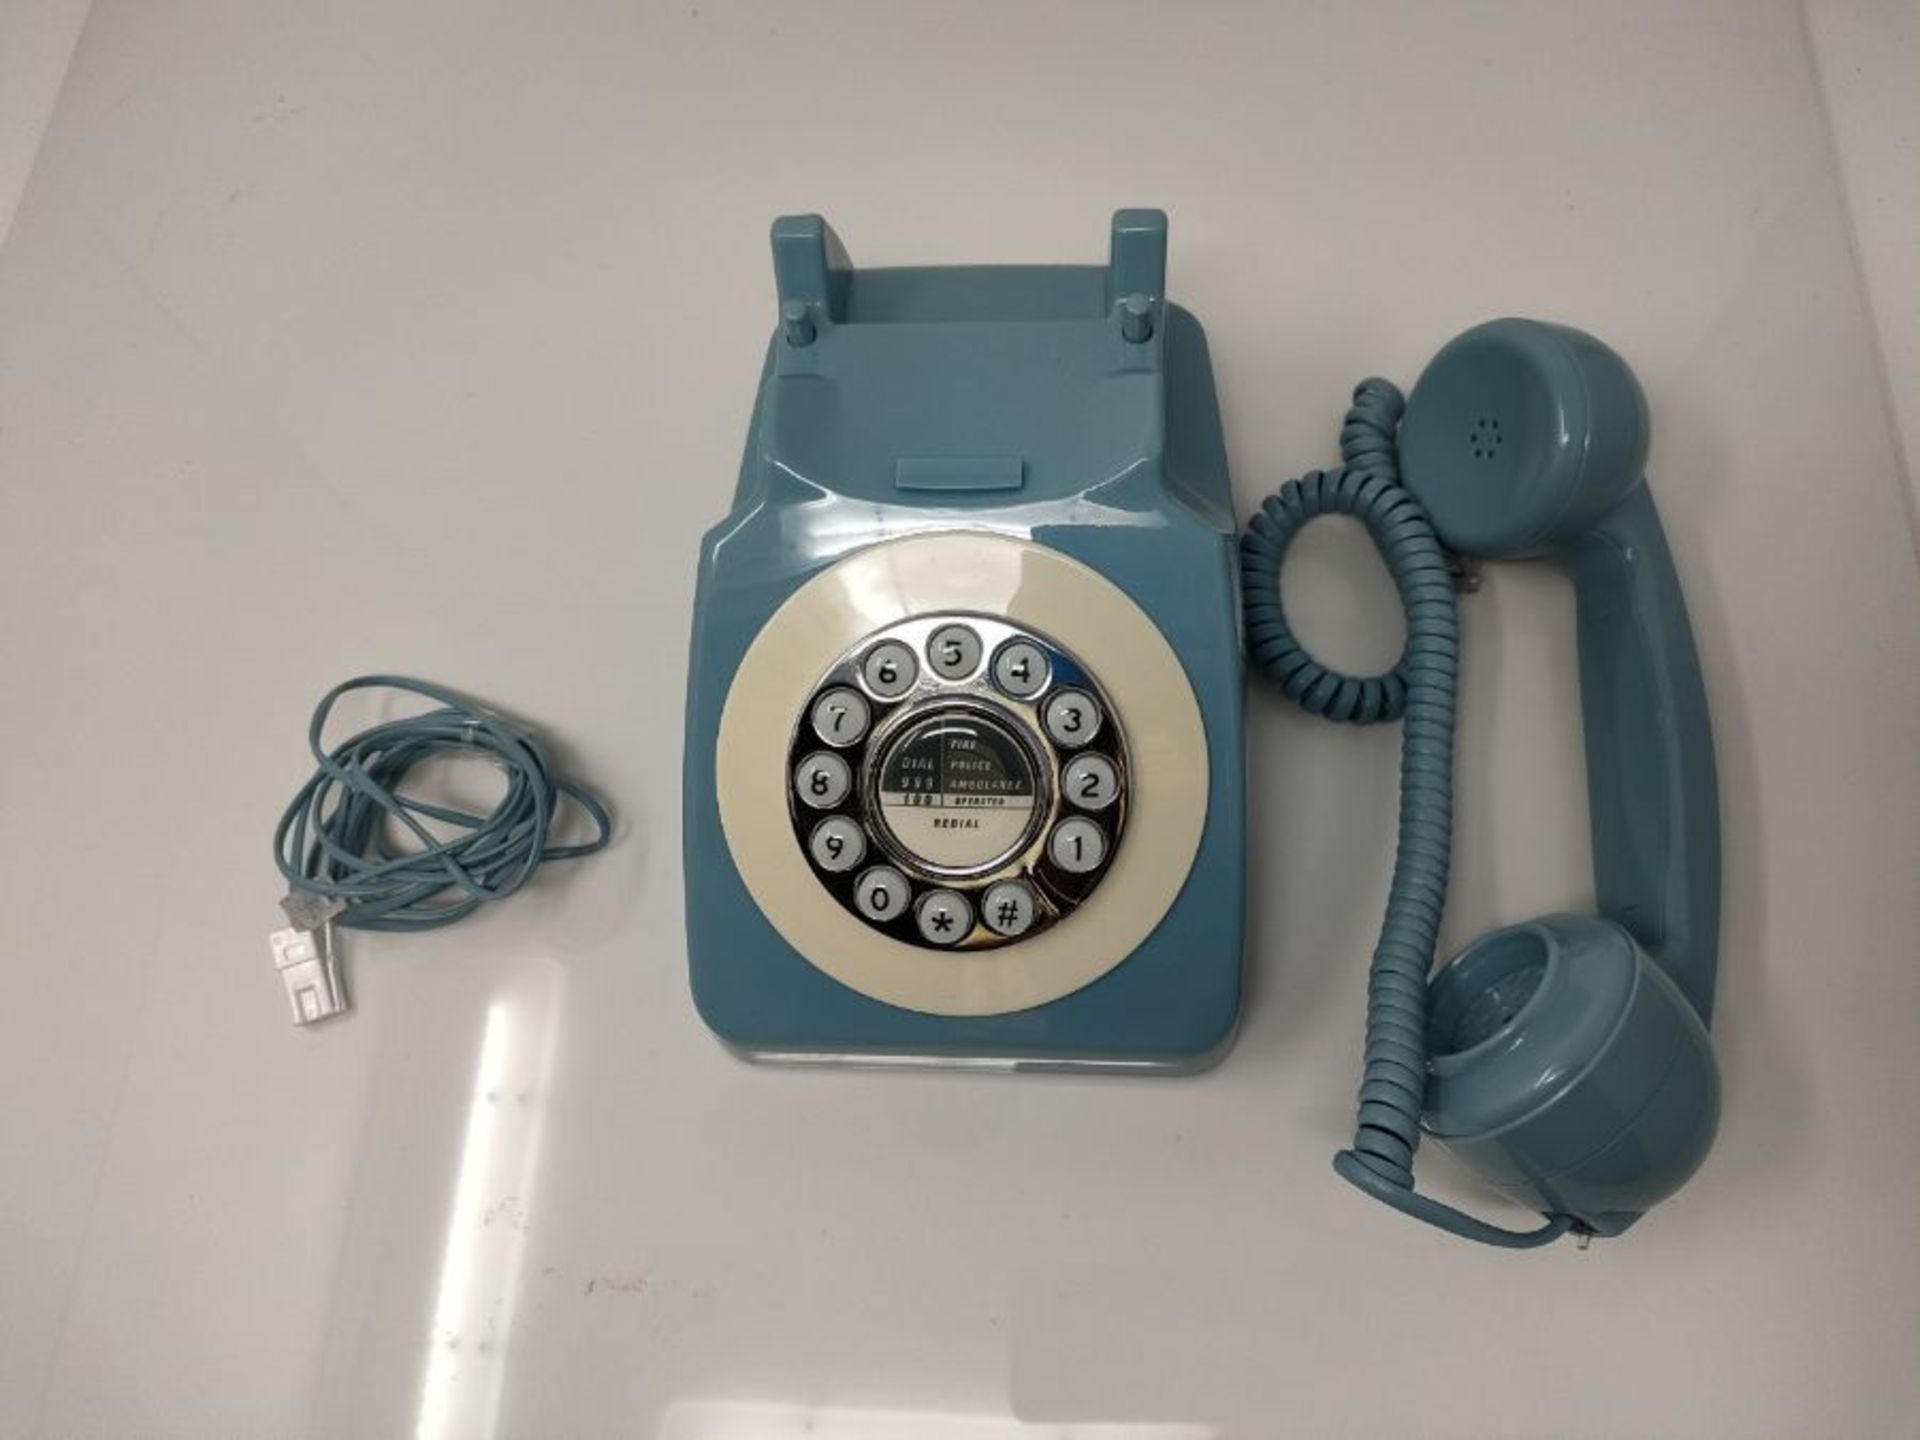 Benross 44540 Classic Retro Vintage Style Home Telephone - Blue - Image 3 of 3